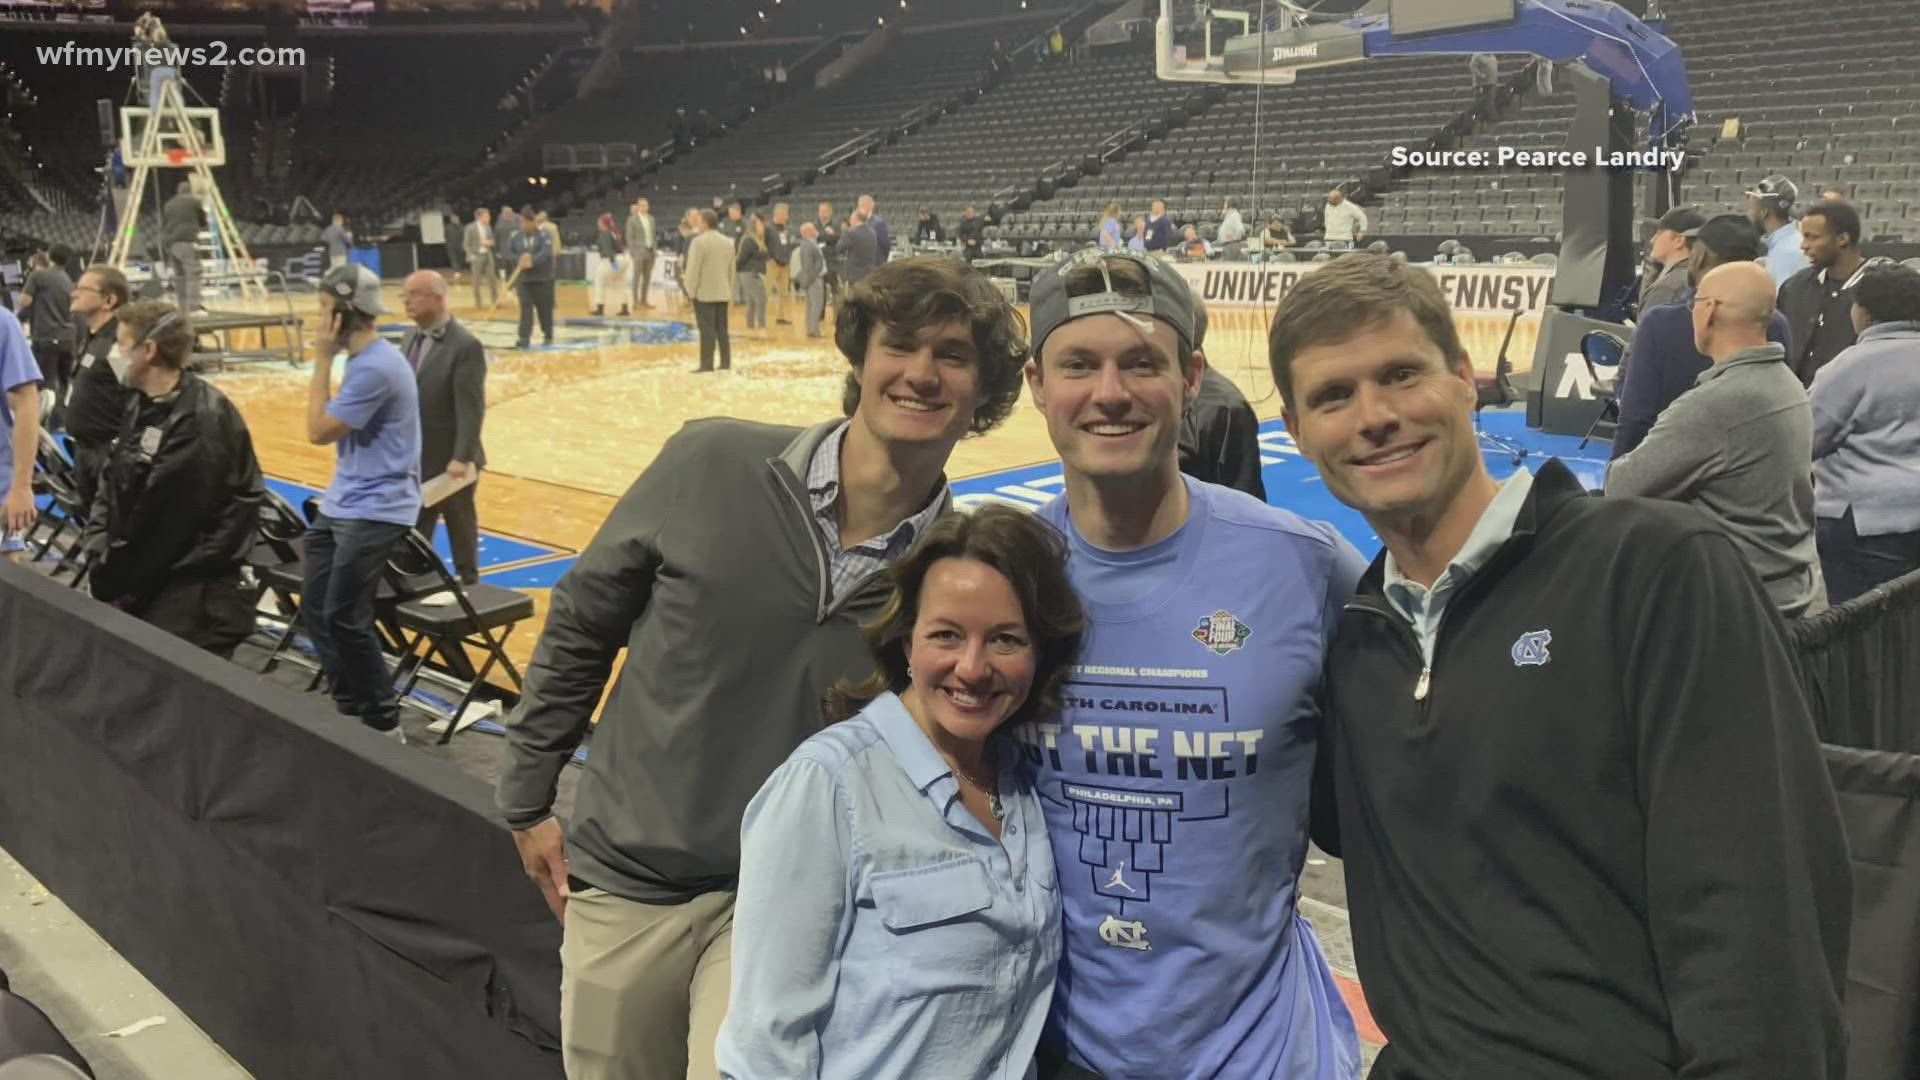 This weekend, a former UNC player will sit in the stands as a father watching his son play in the Final Four against Duke.